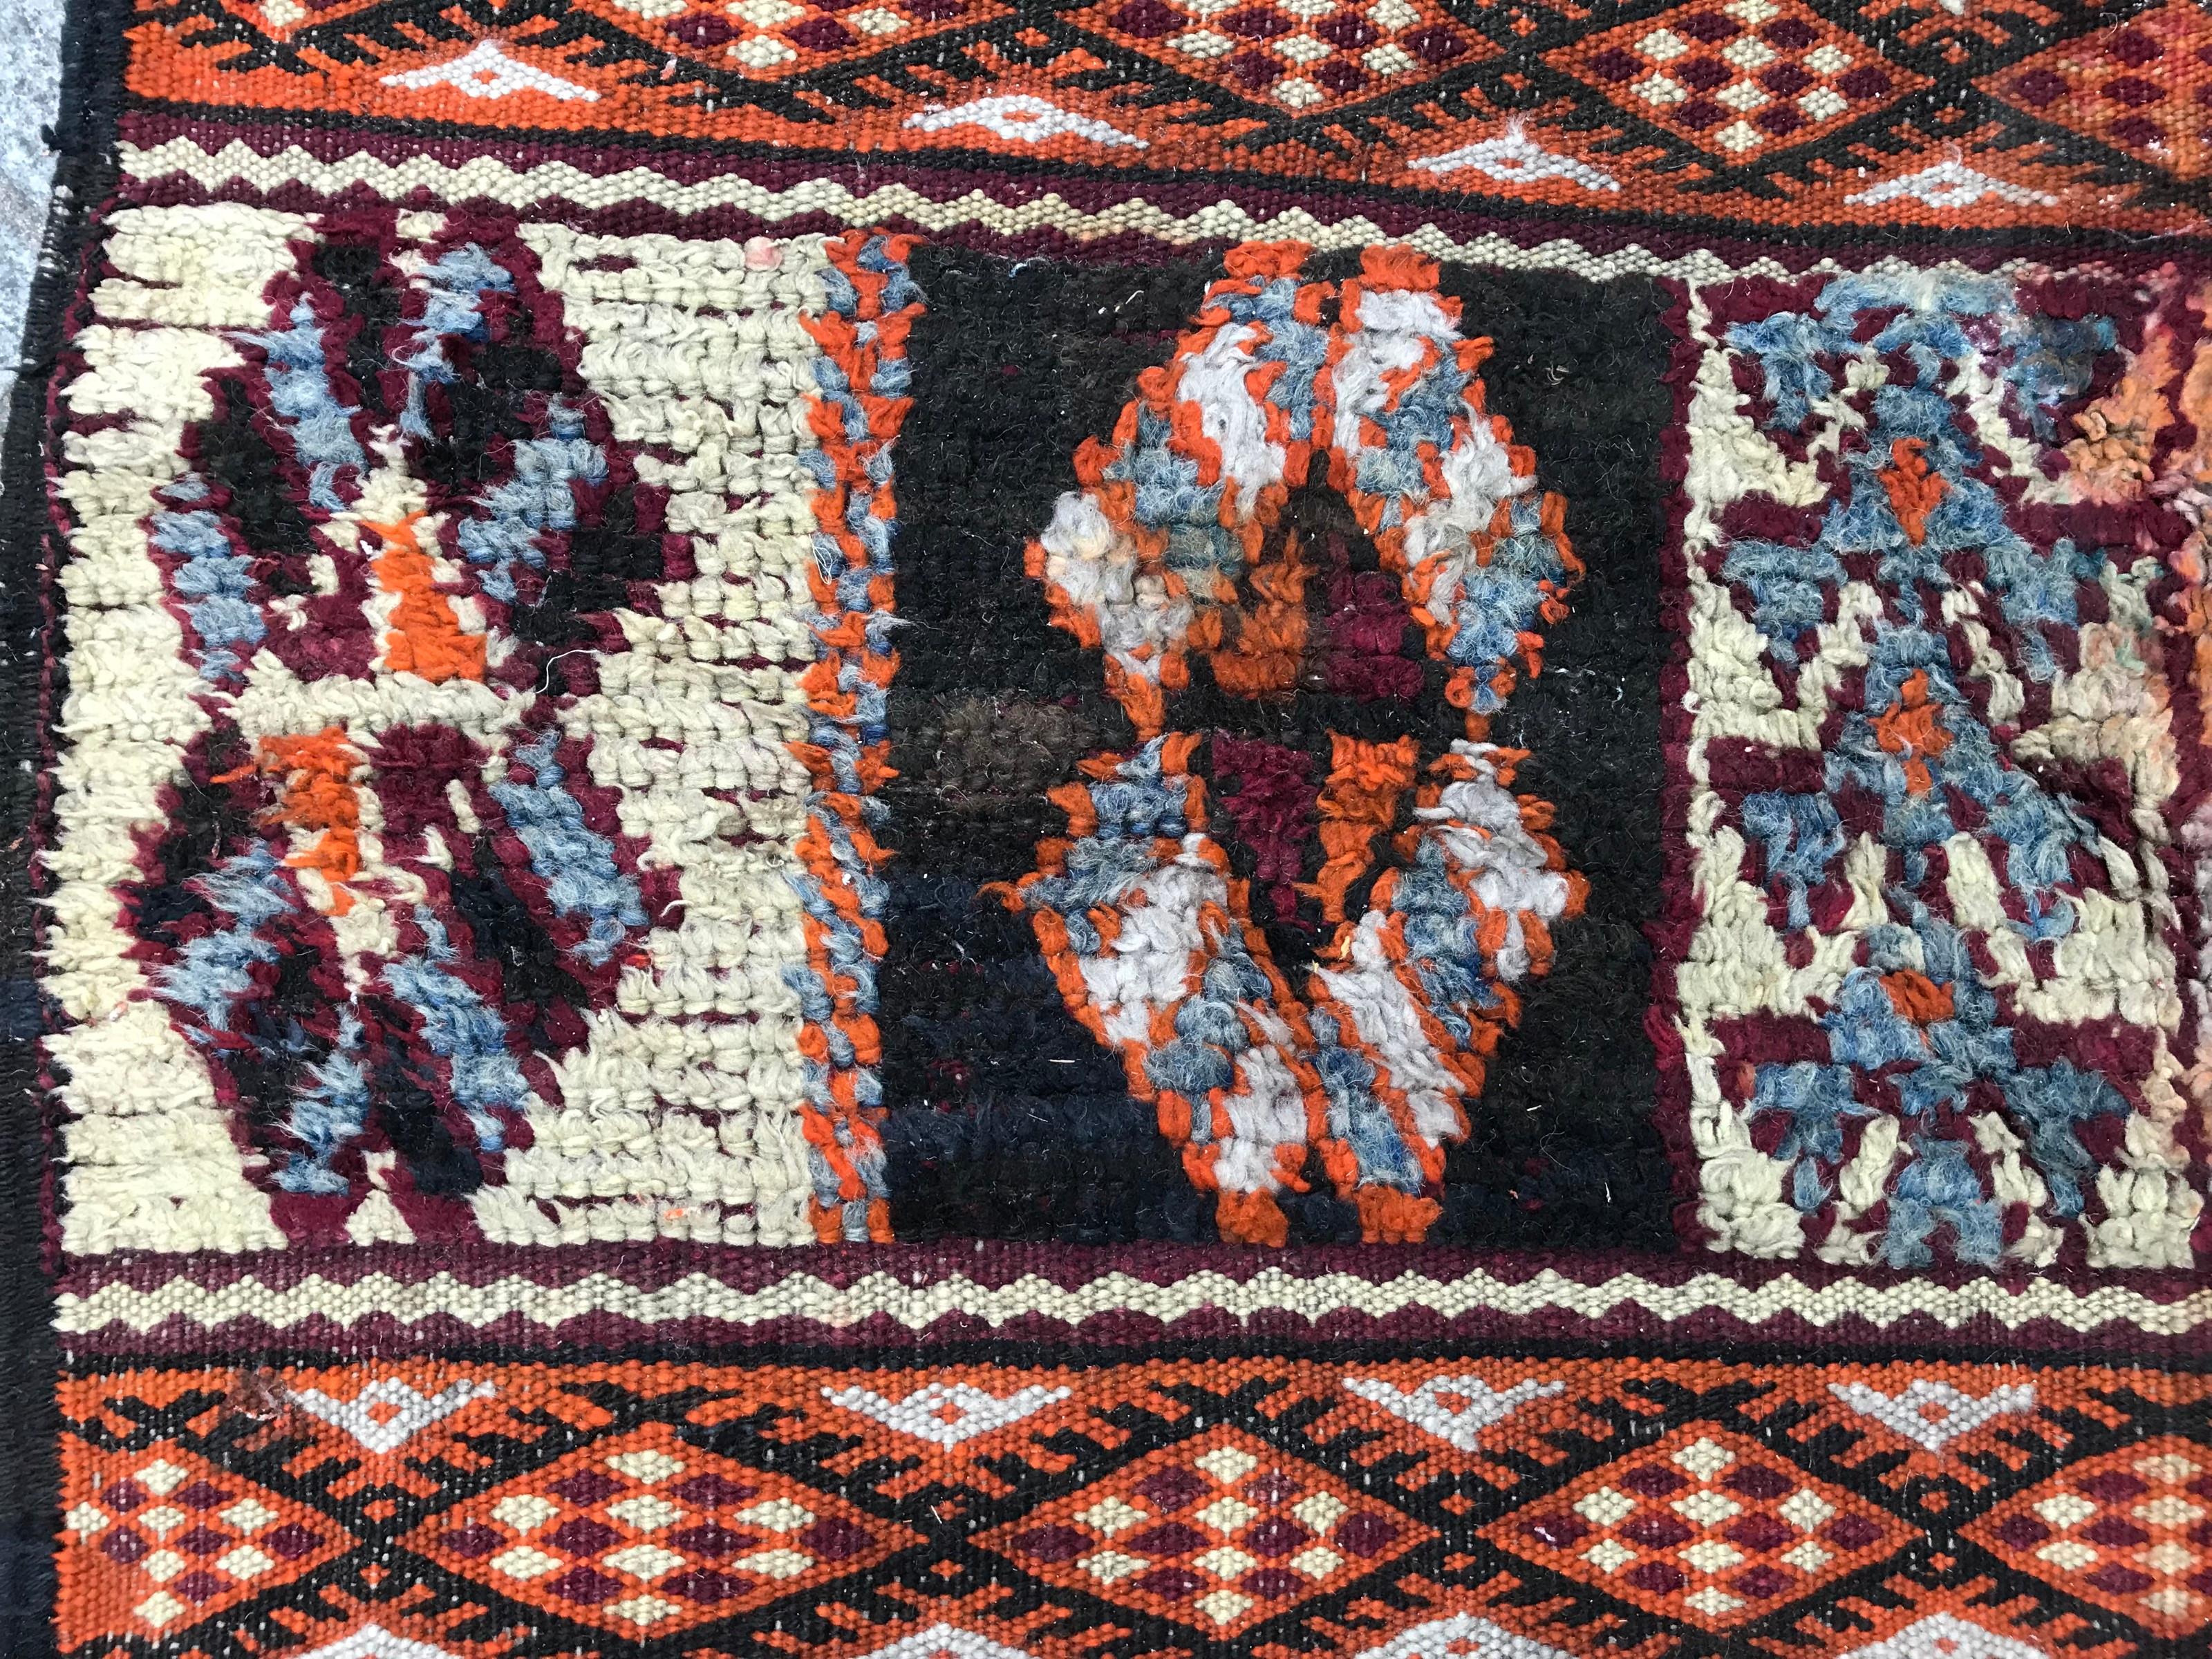 Hand-Woven Antique Moroccan Berber Kilim Rug For Sale